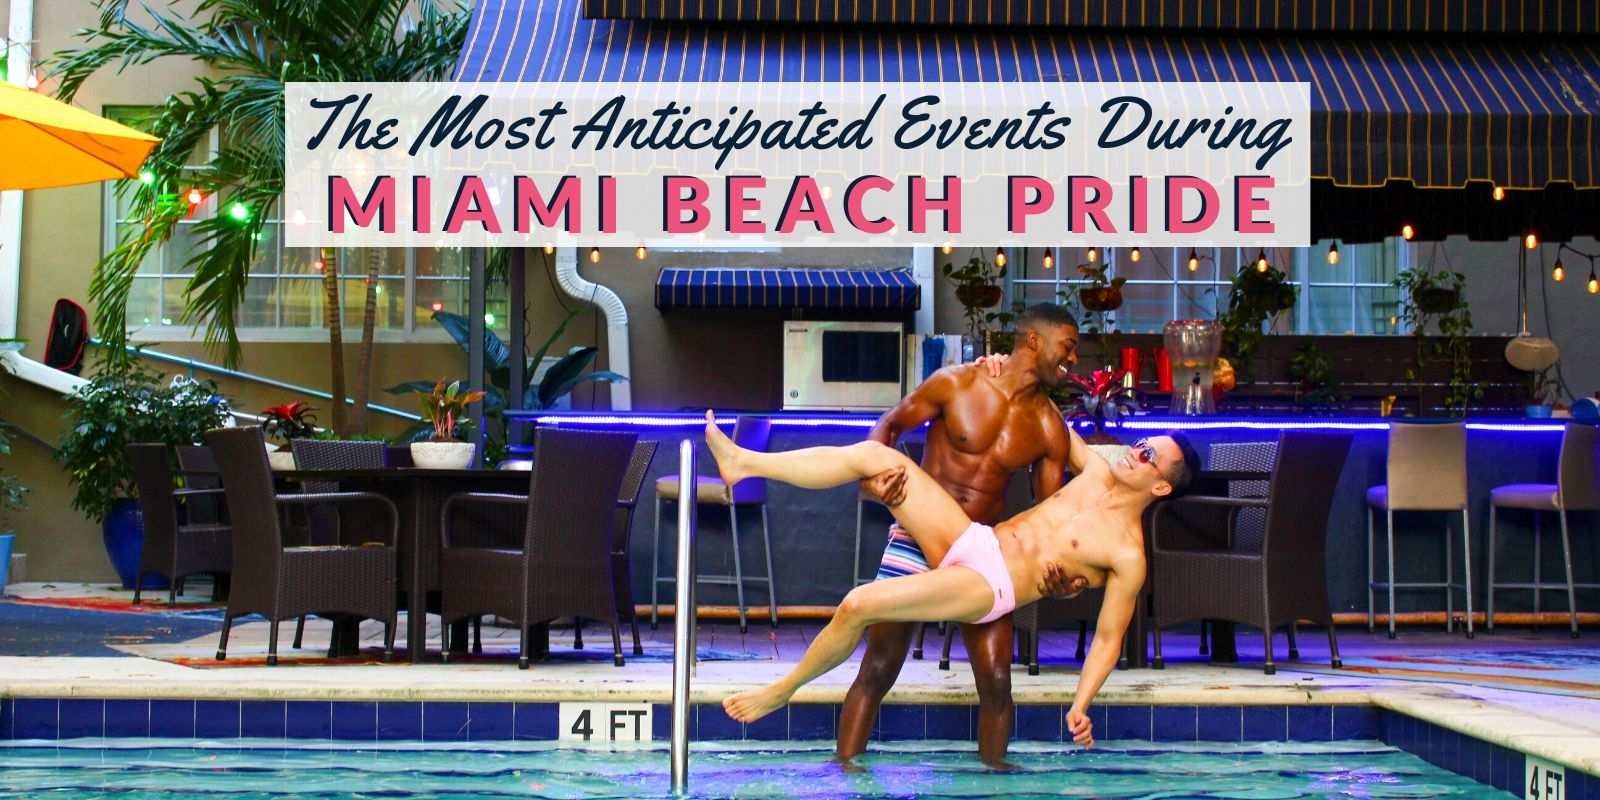 If you're heading to Miami Beach Pride these are the most anticipated events that you don't want to miss!